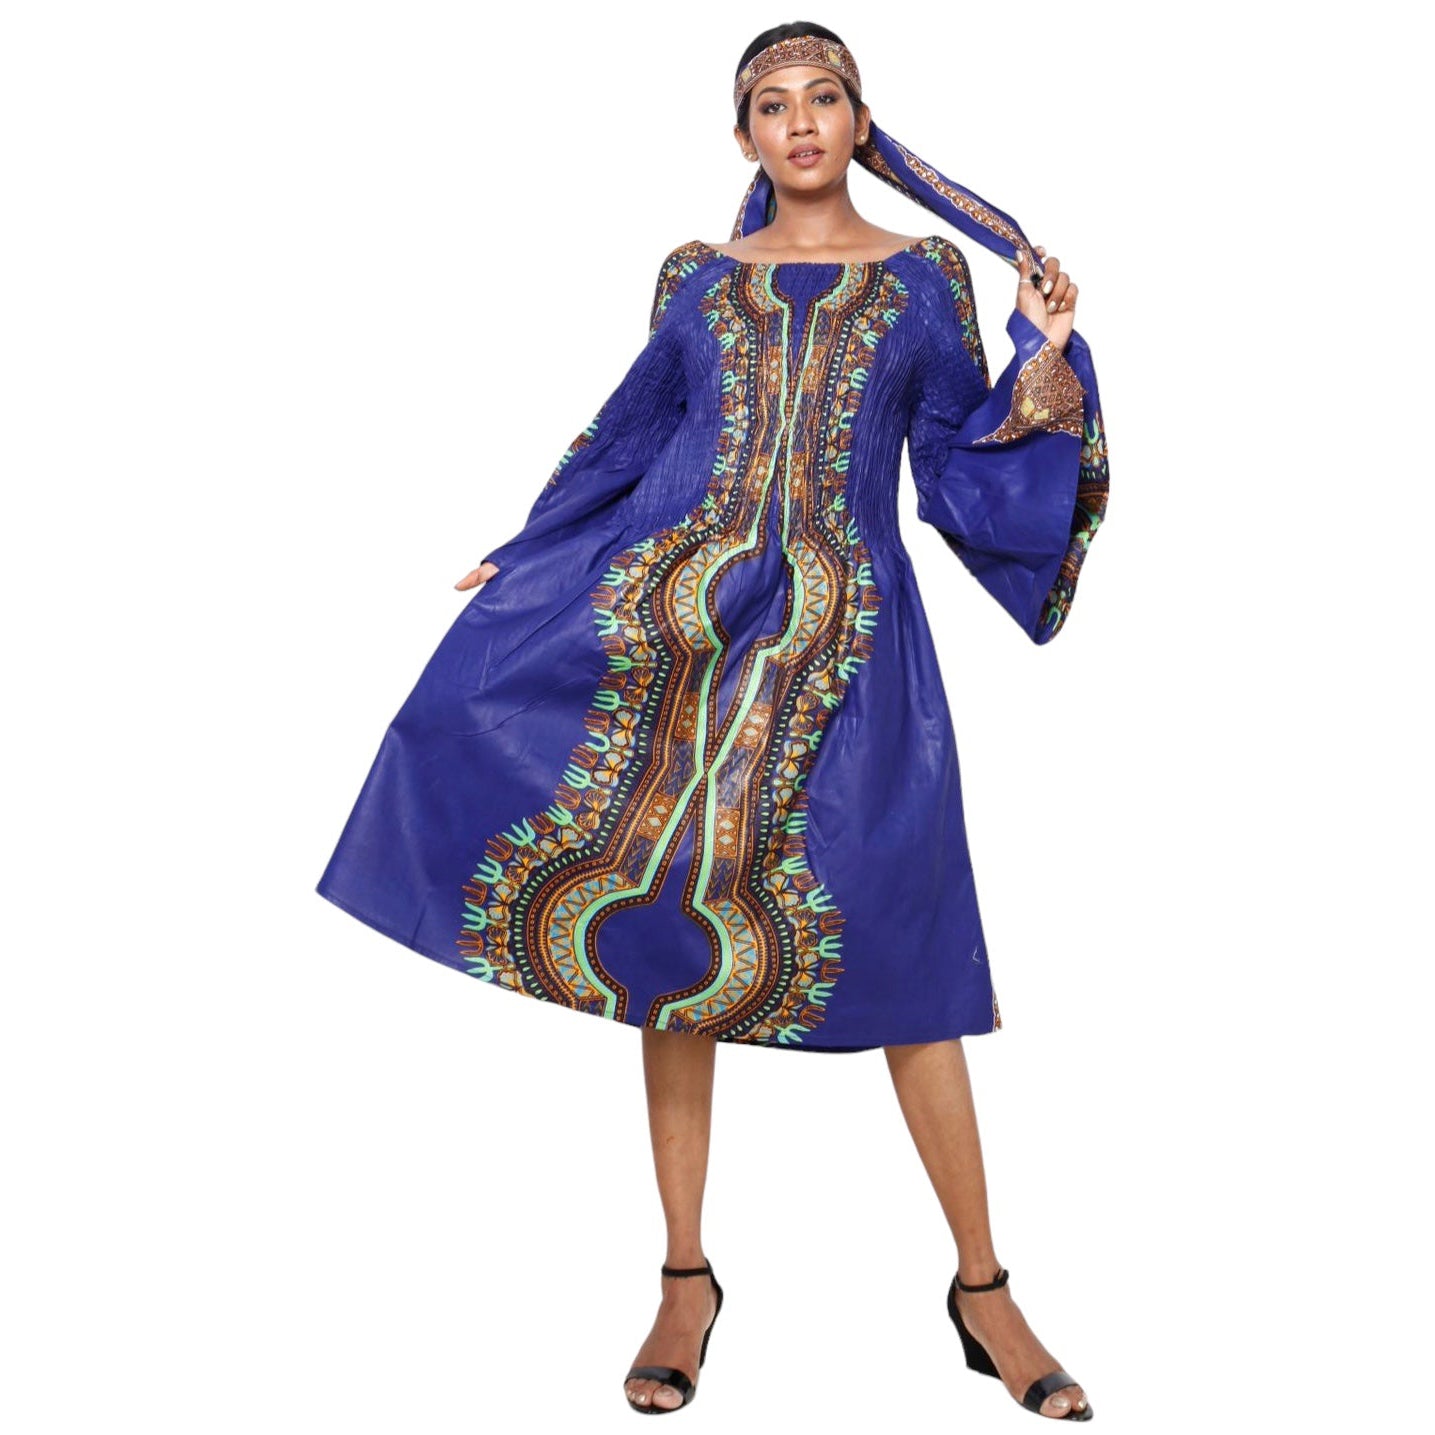 Women's Long Sleeve Smocking Short Dress with Bell Sleeves -- FI-50073